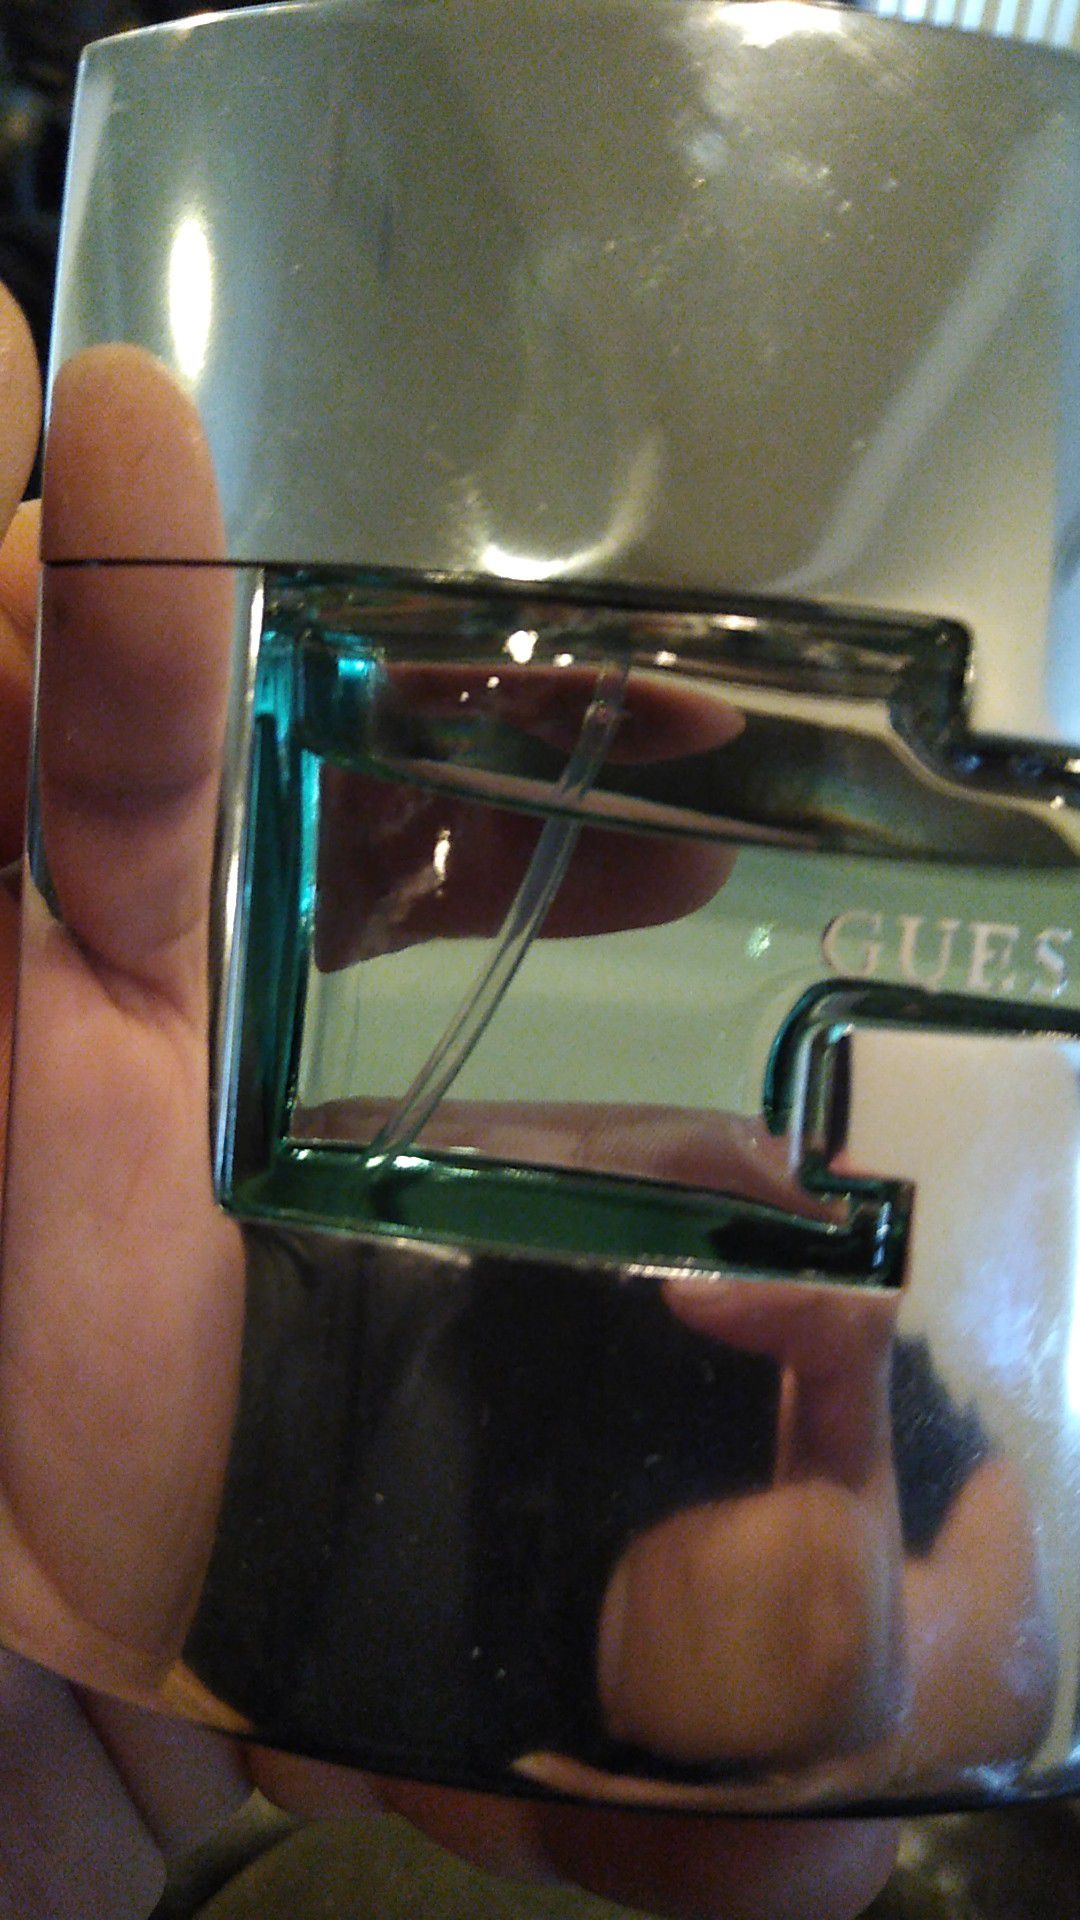 Guess cologne